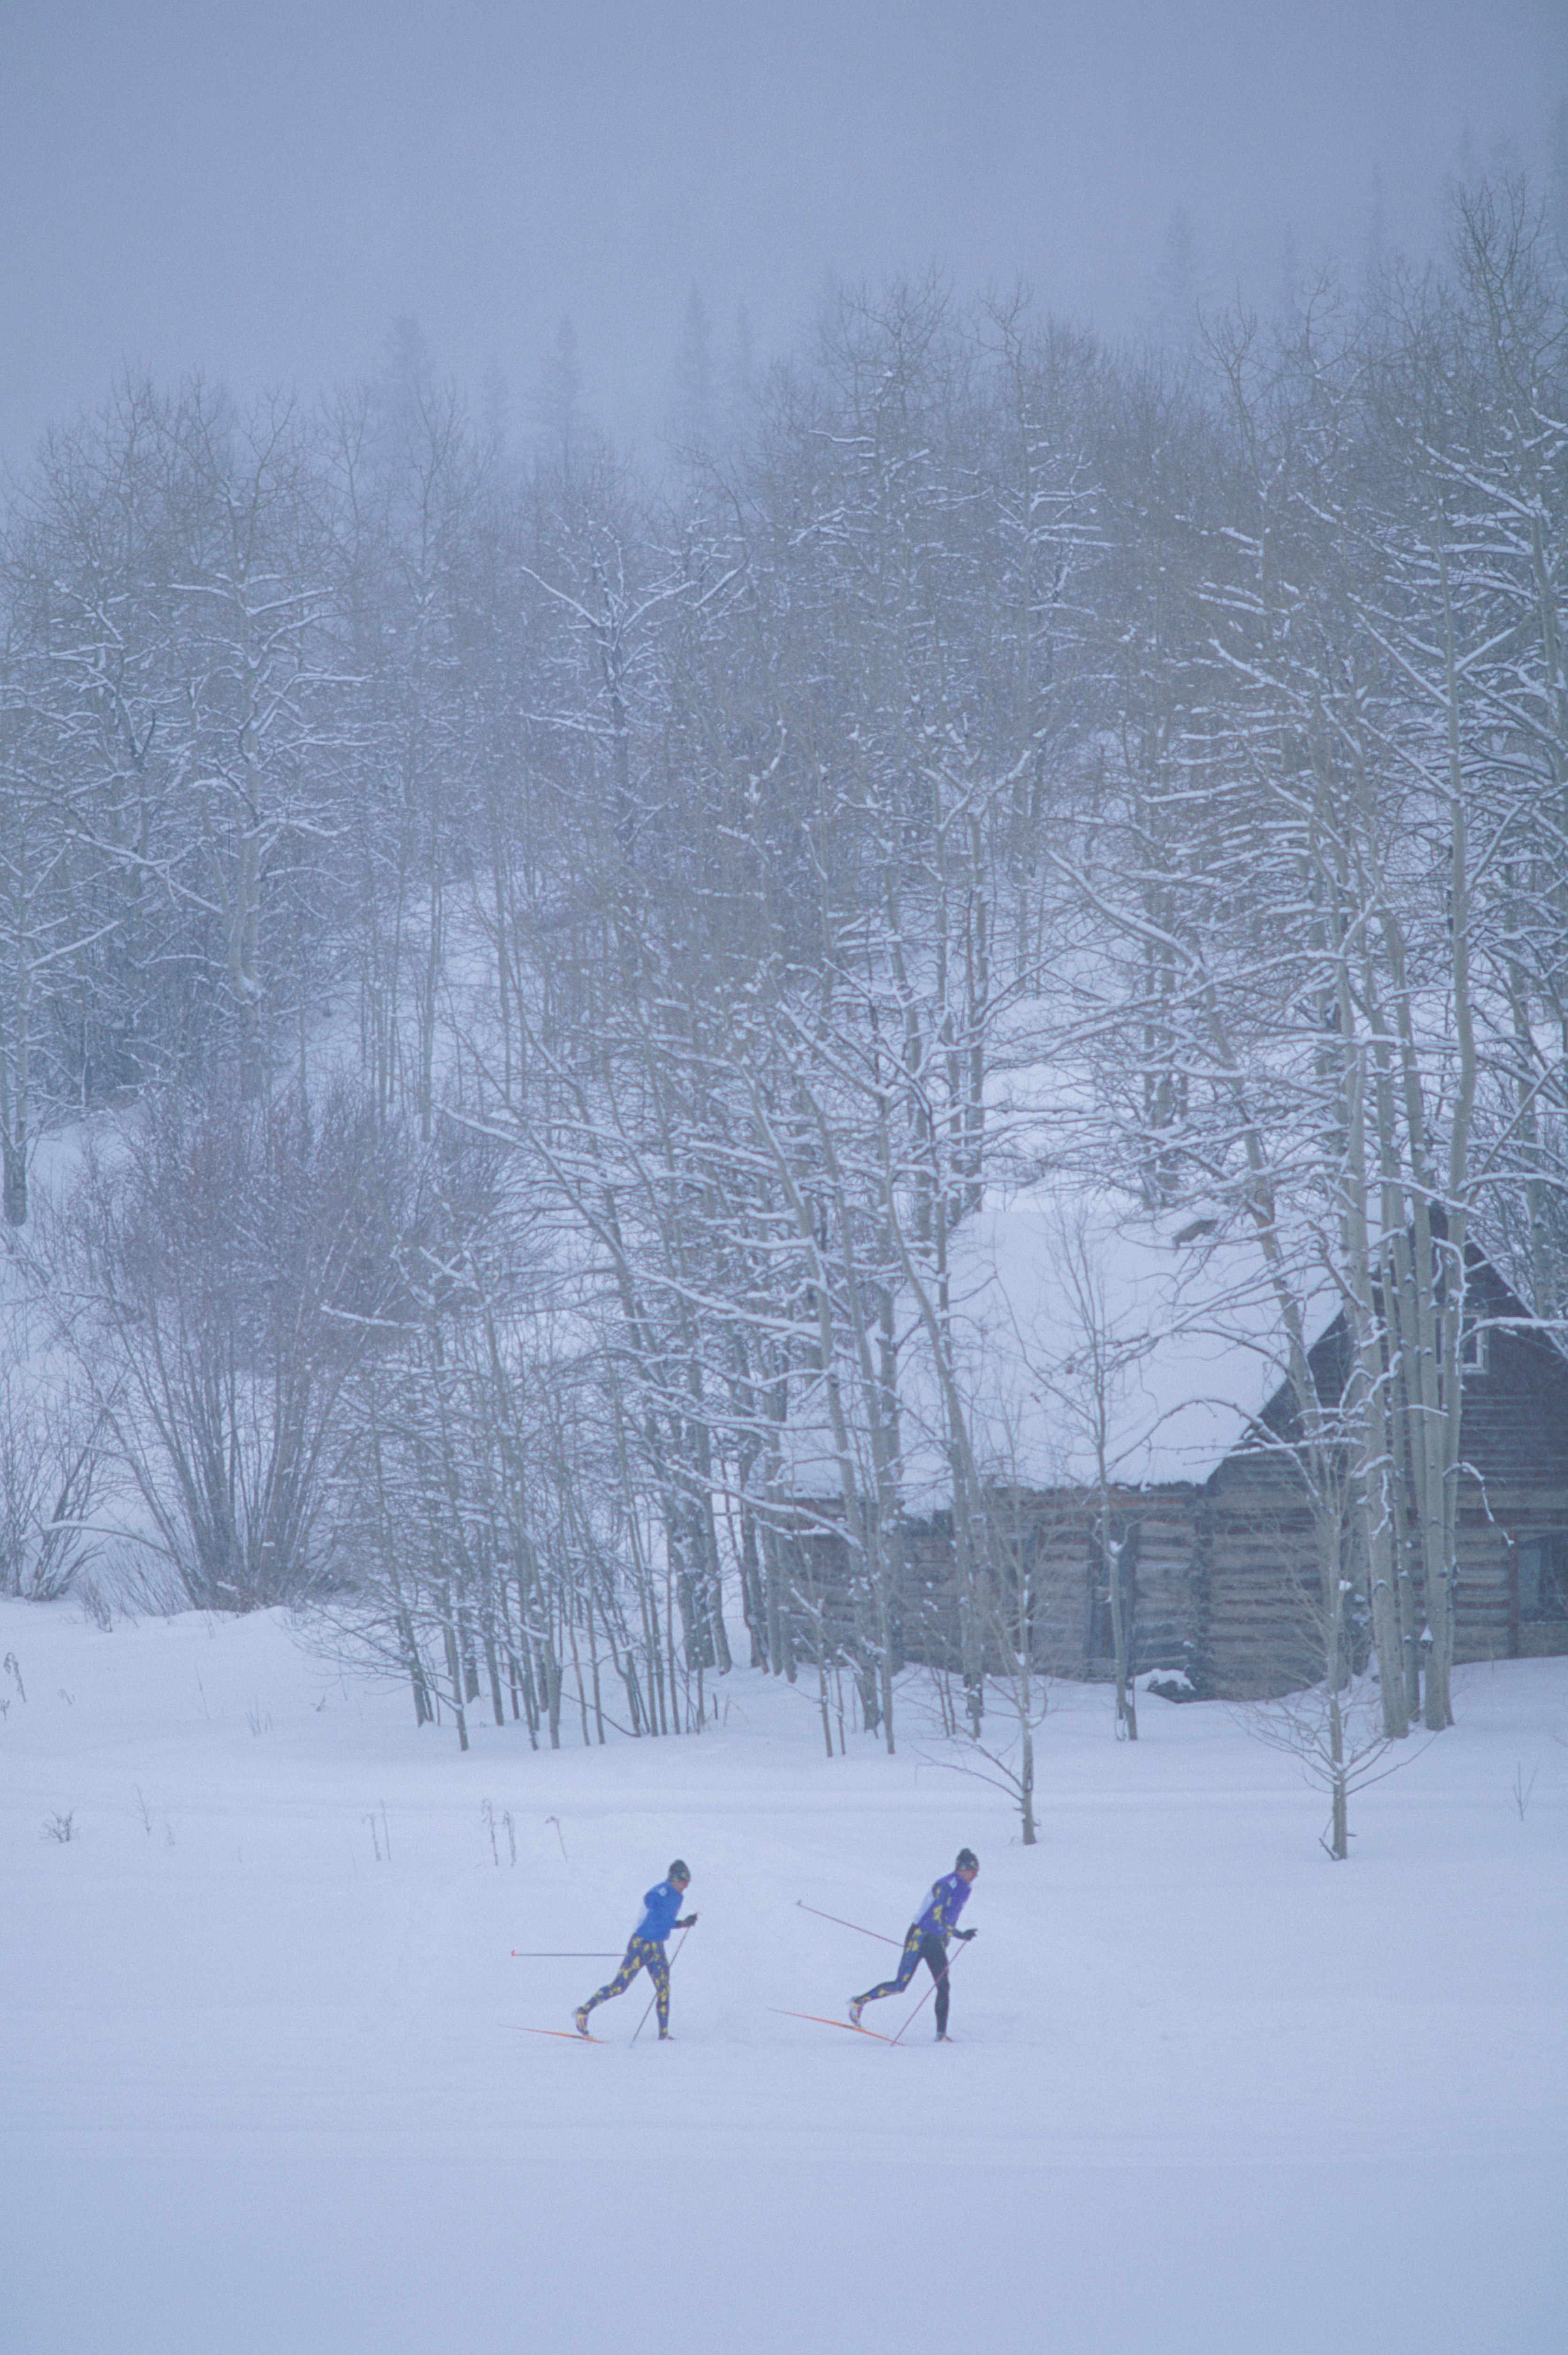 Two men nordic ski across a snowy meadow in front of a log cabin in the snow